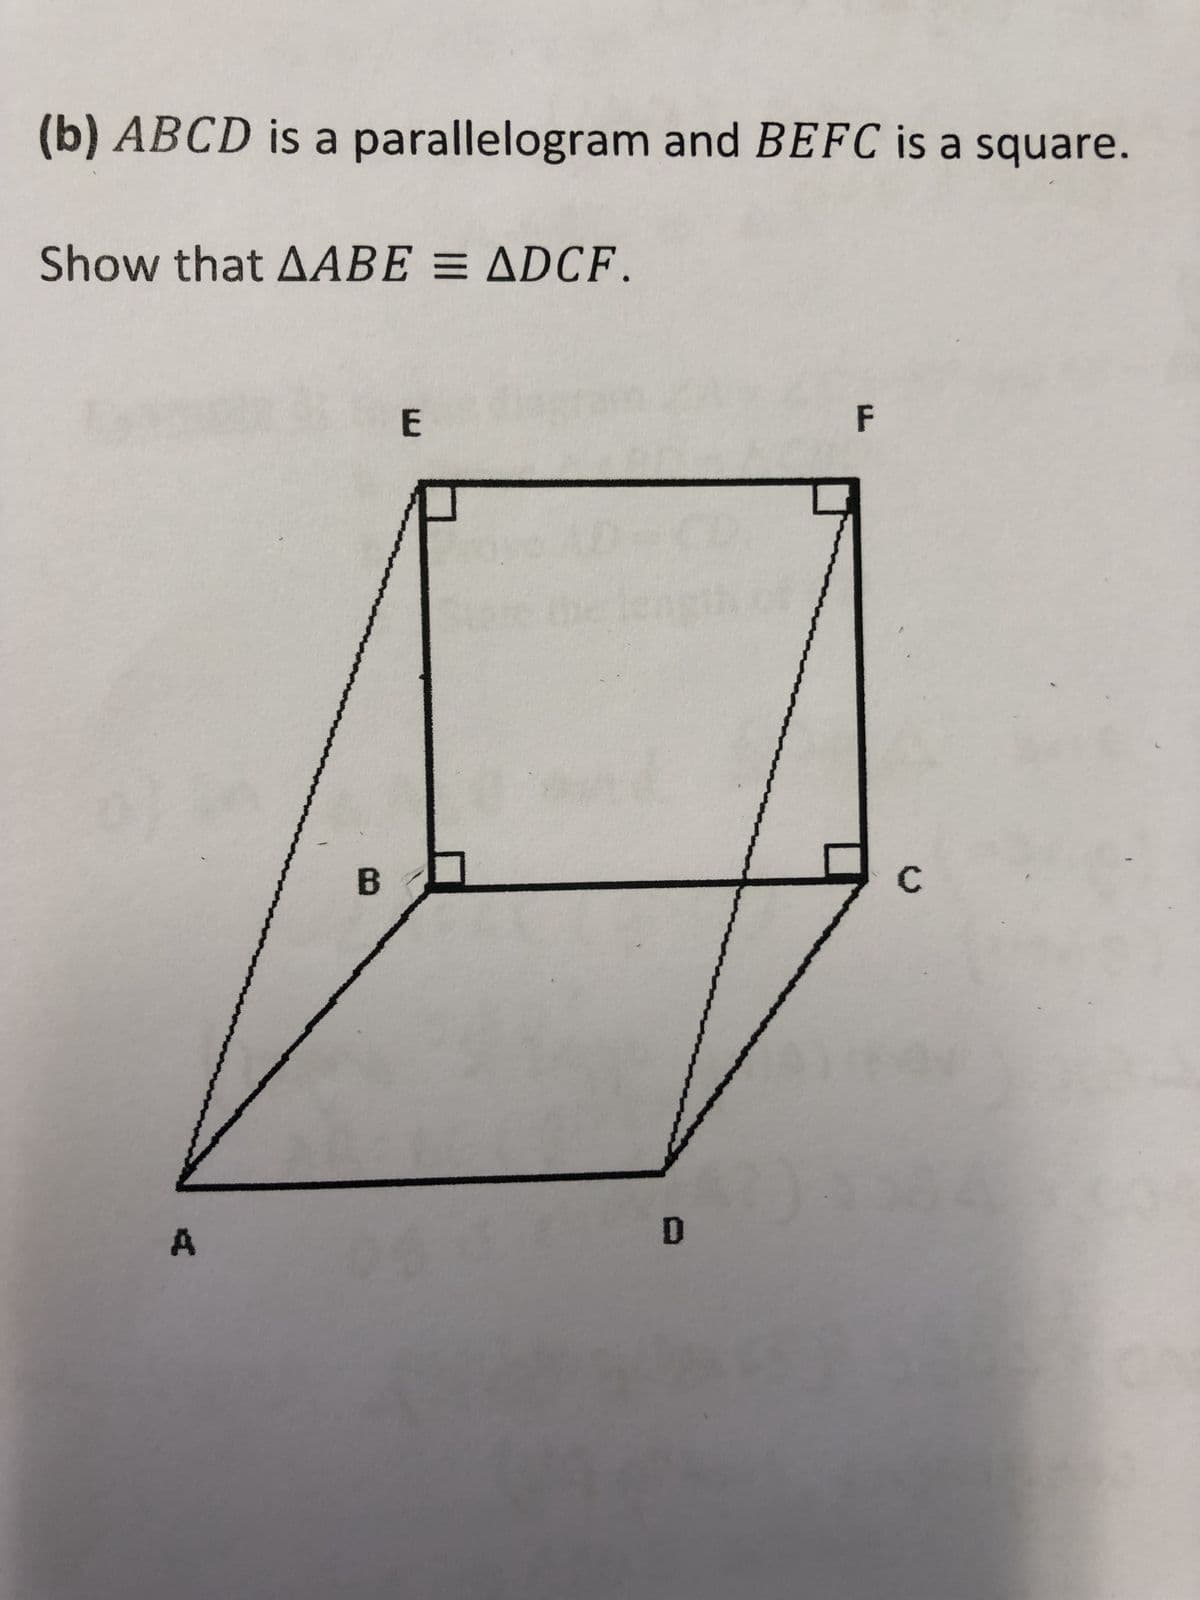 (b) ABCD is a parallelogram and BEFC is a square.
Show that AABE = ADCF.
E
F
A
B
D
C